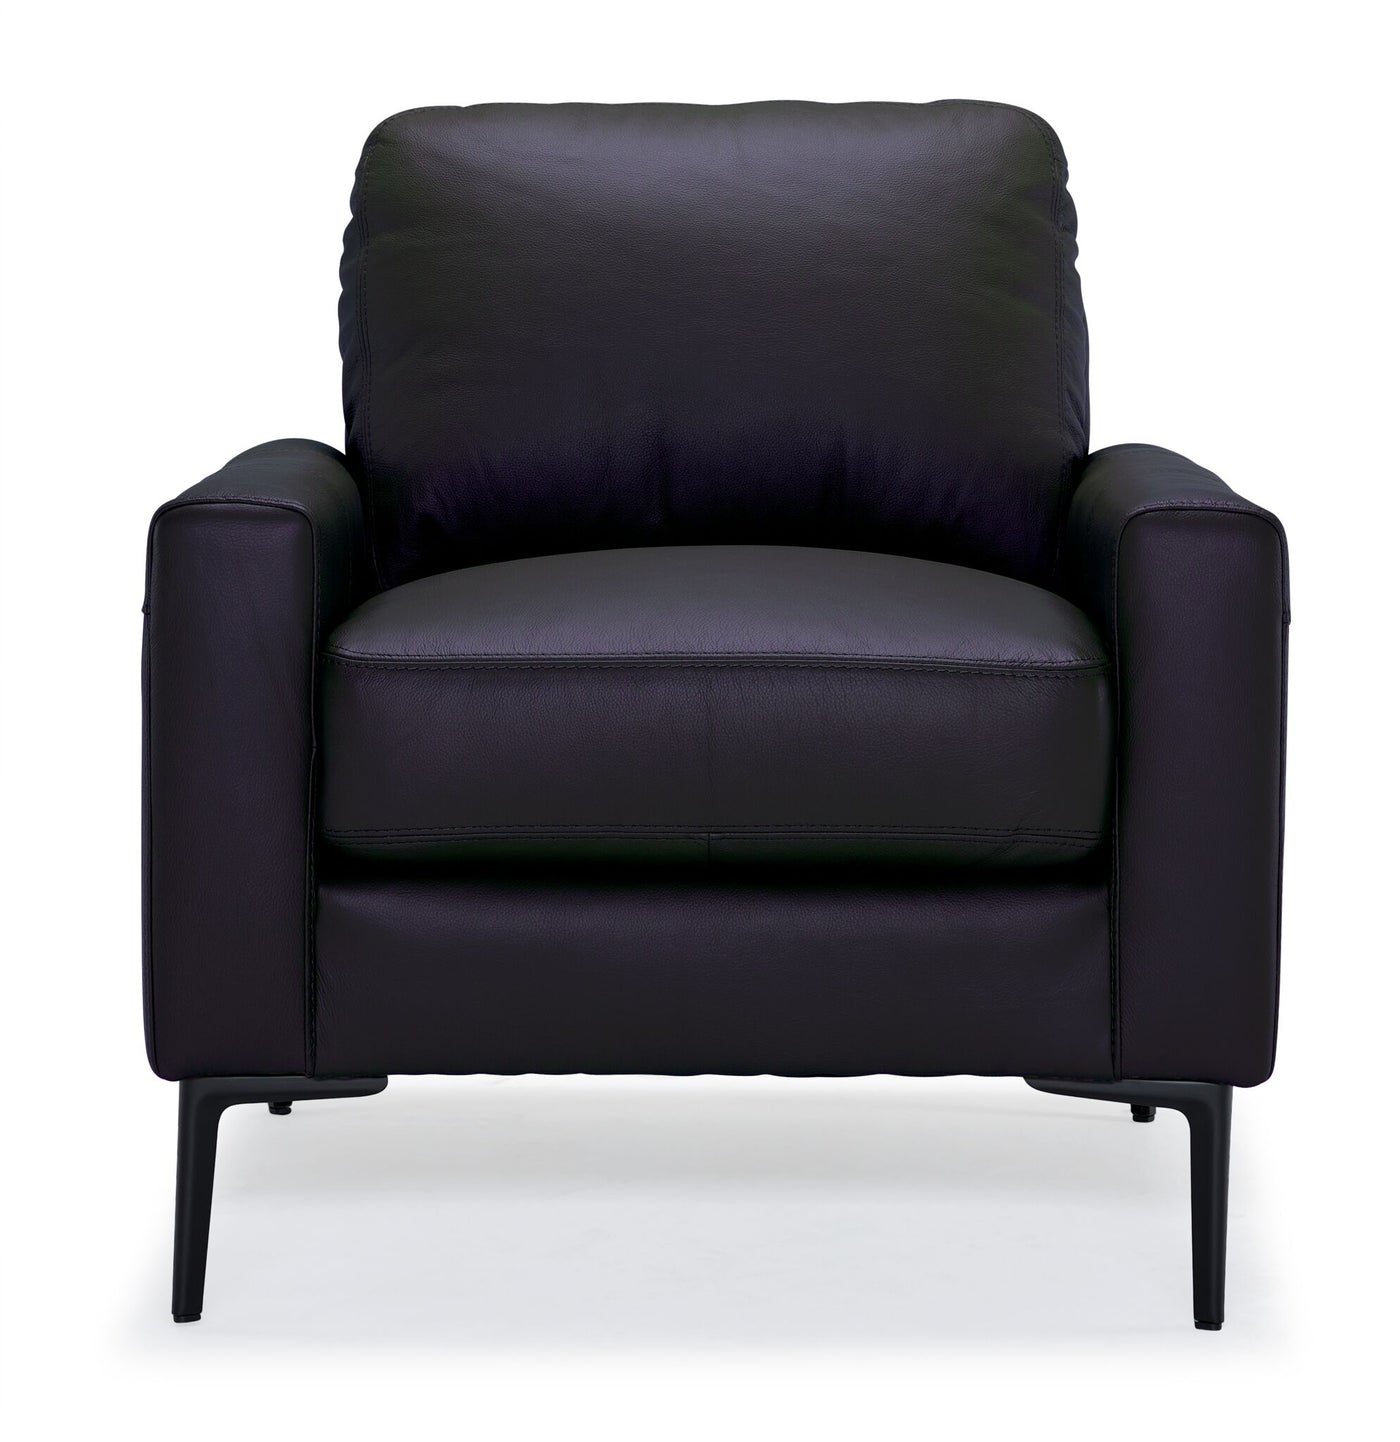 Chito Leather Chair - Raven